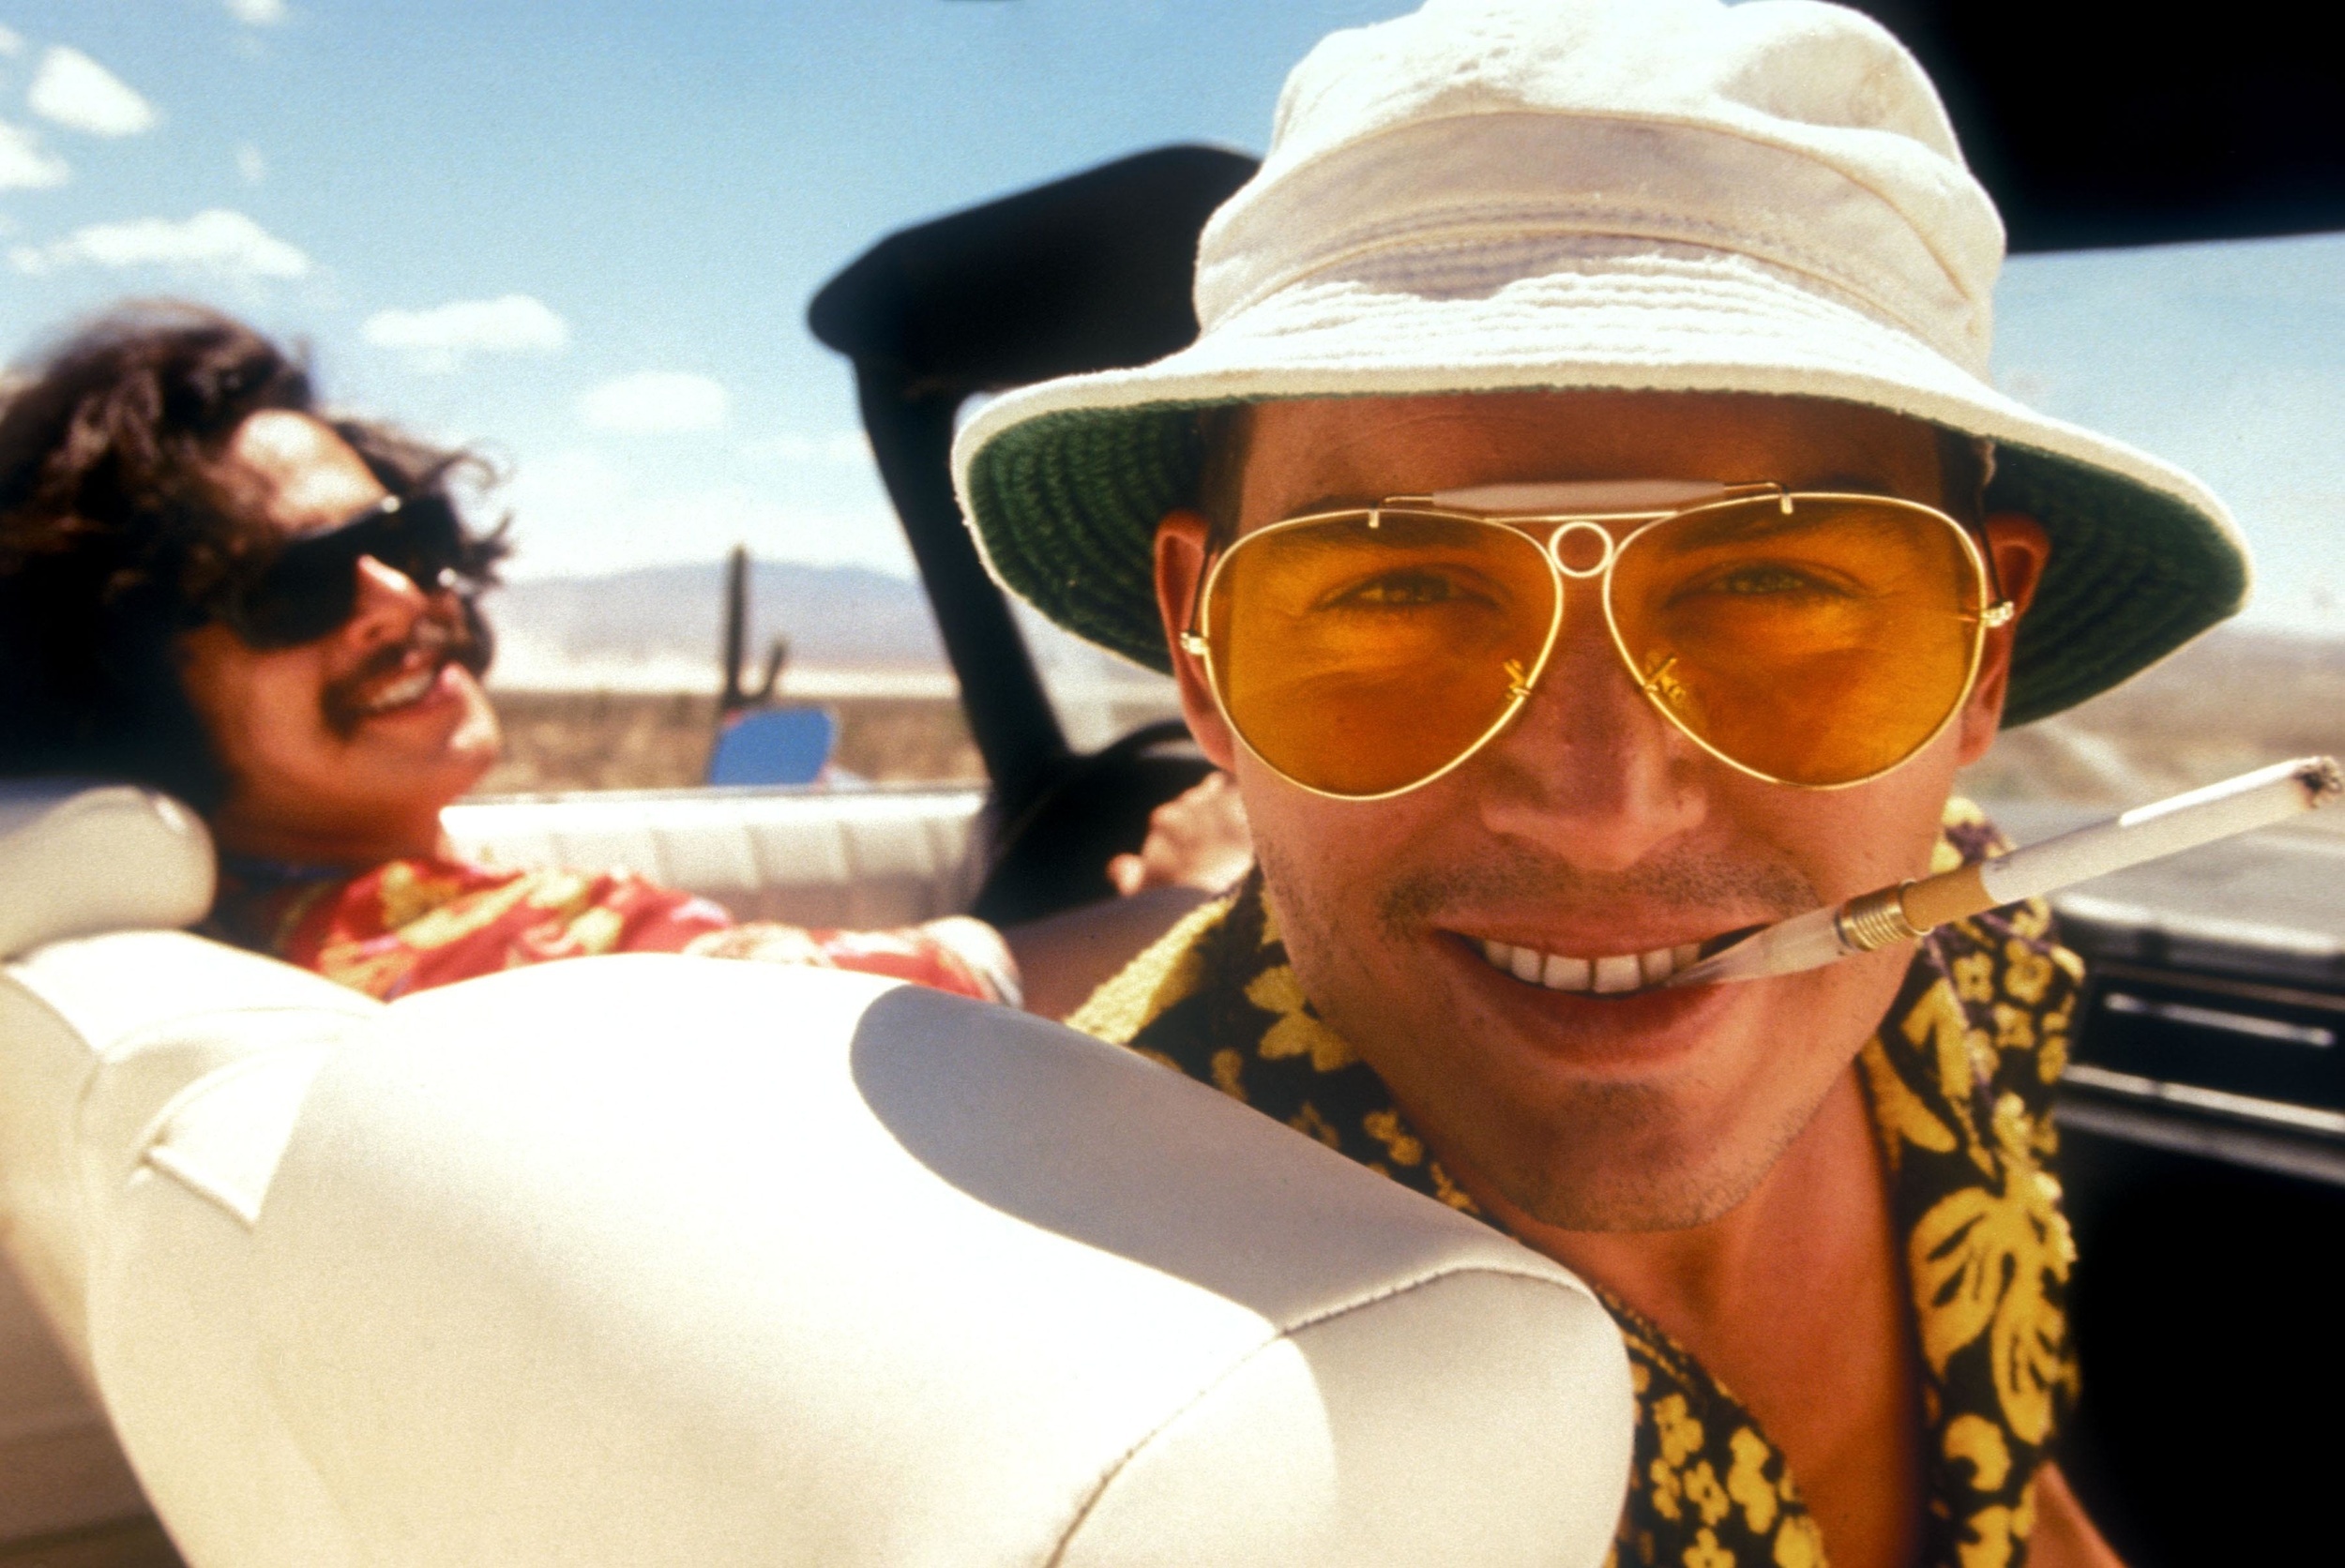 <p>In these modern times, a film starring Johnny Depp and directed by Terry Gilliam is perhaps not going to be remembered as fondly, and <em>Fear and Loathing in Las Vegas</em> has always been more of a cult movie anyway. It hooks you in with the first line, effectively a statement of purpose: “We were somewhere around Barstow, on the edge of the desert, when the drugs began to take hold.”</p><p>You may also like: <a href='https://www.yardbarker.com/entertainment/articles/the_25_best_tv_show_sidekicks_101823/s1__30083927'>The 25 best TV show sidekicks</a></p>